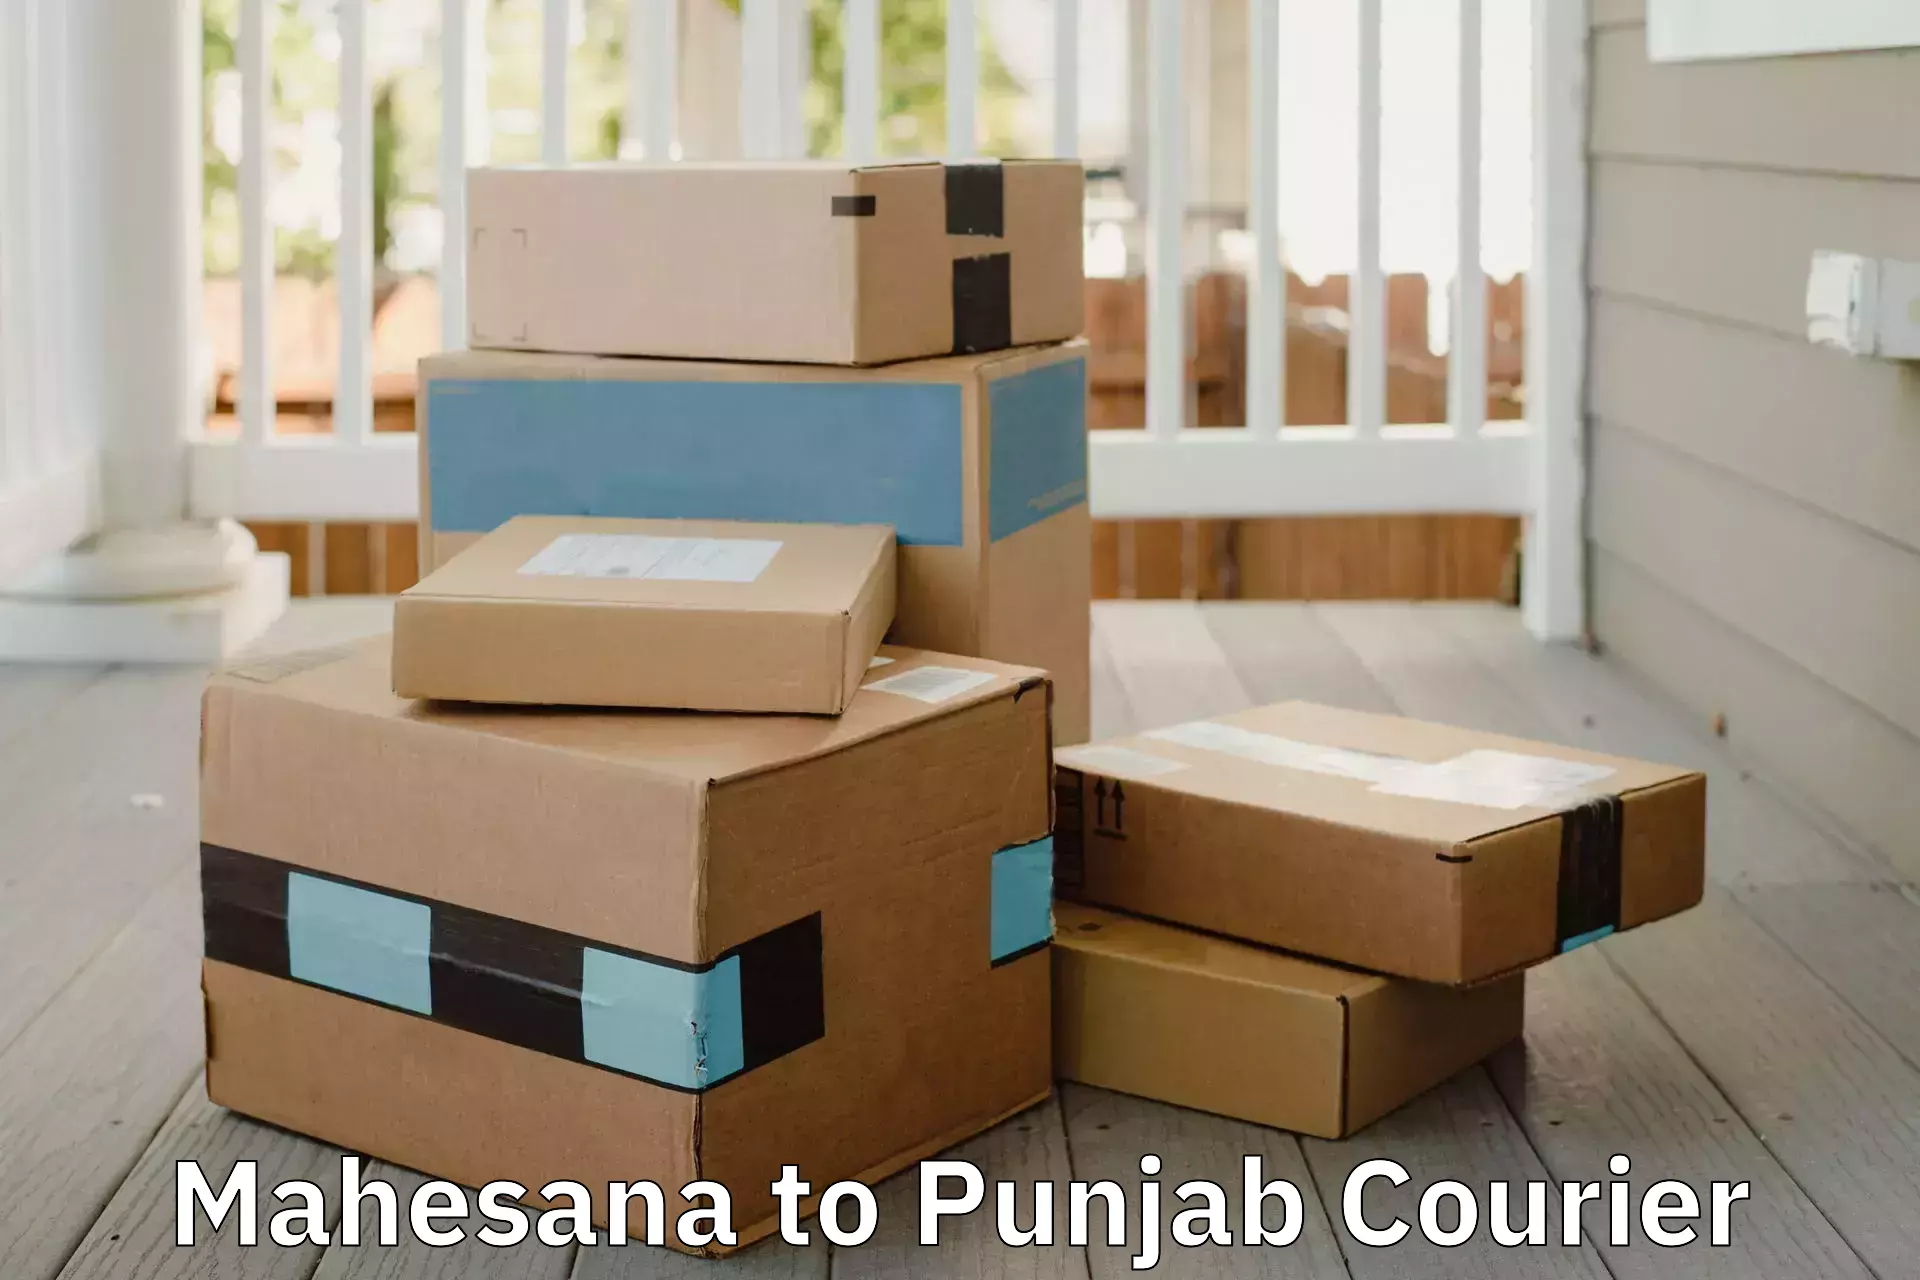 Quality relocation assistance in Mahesana to Punjab